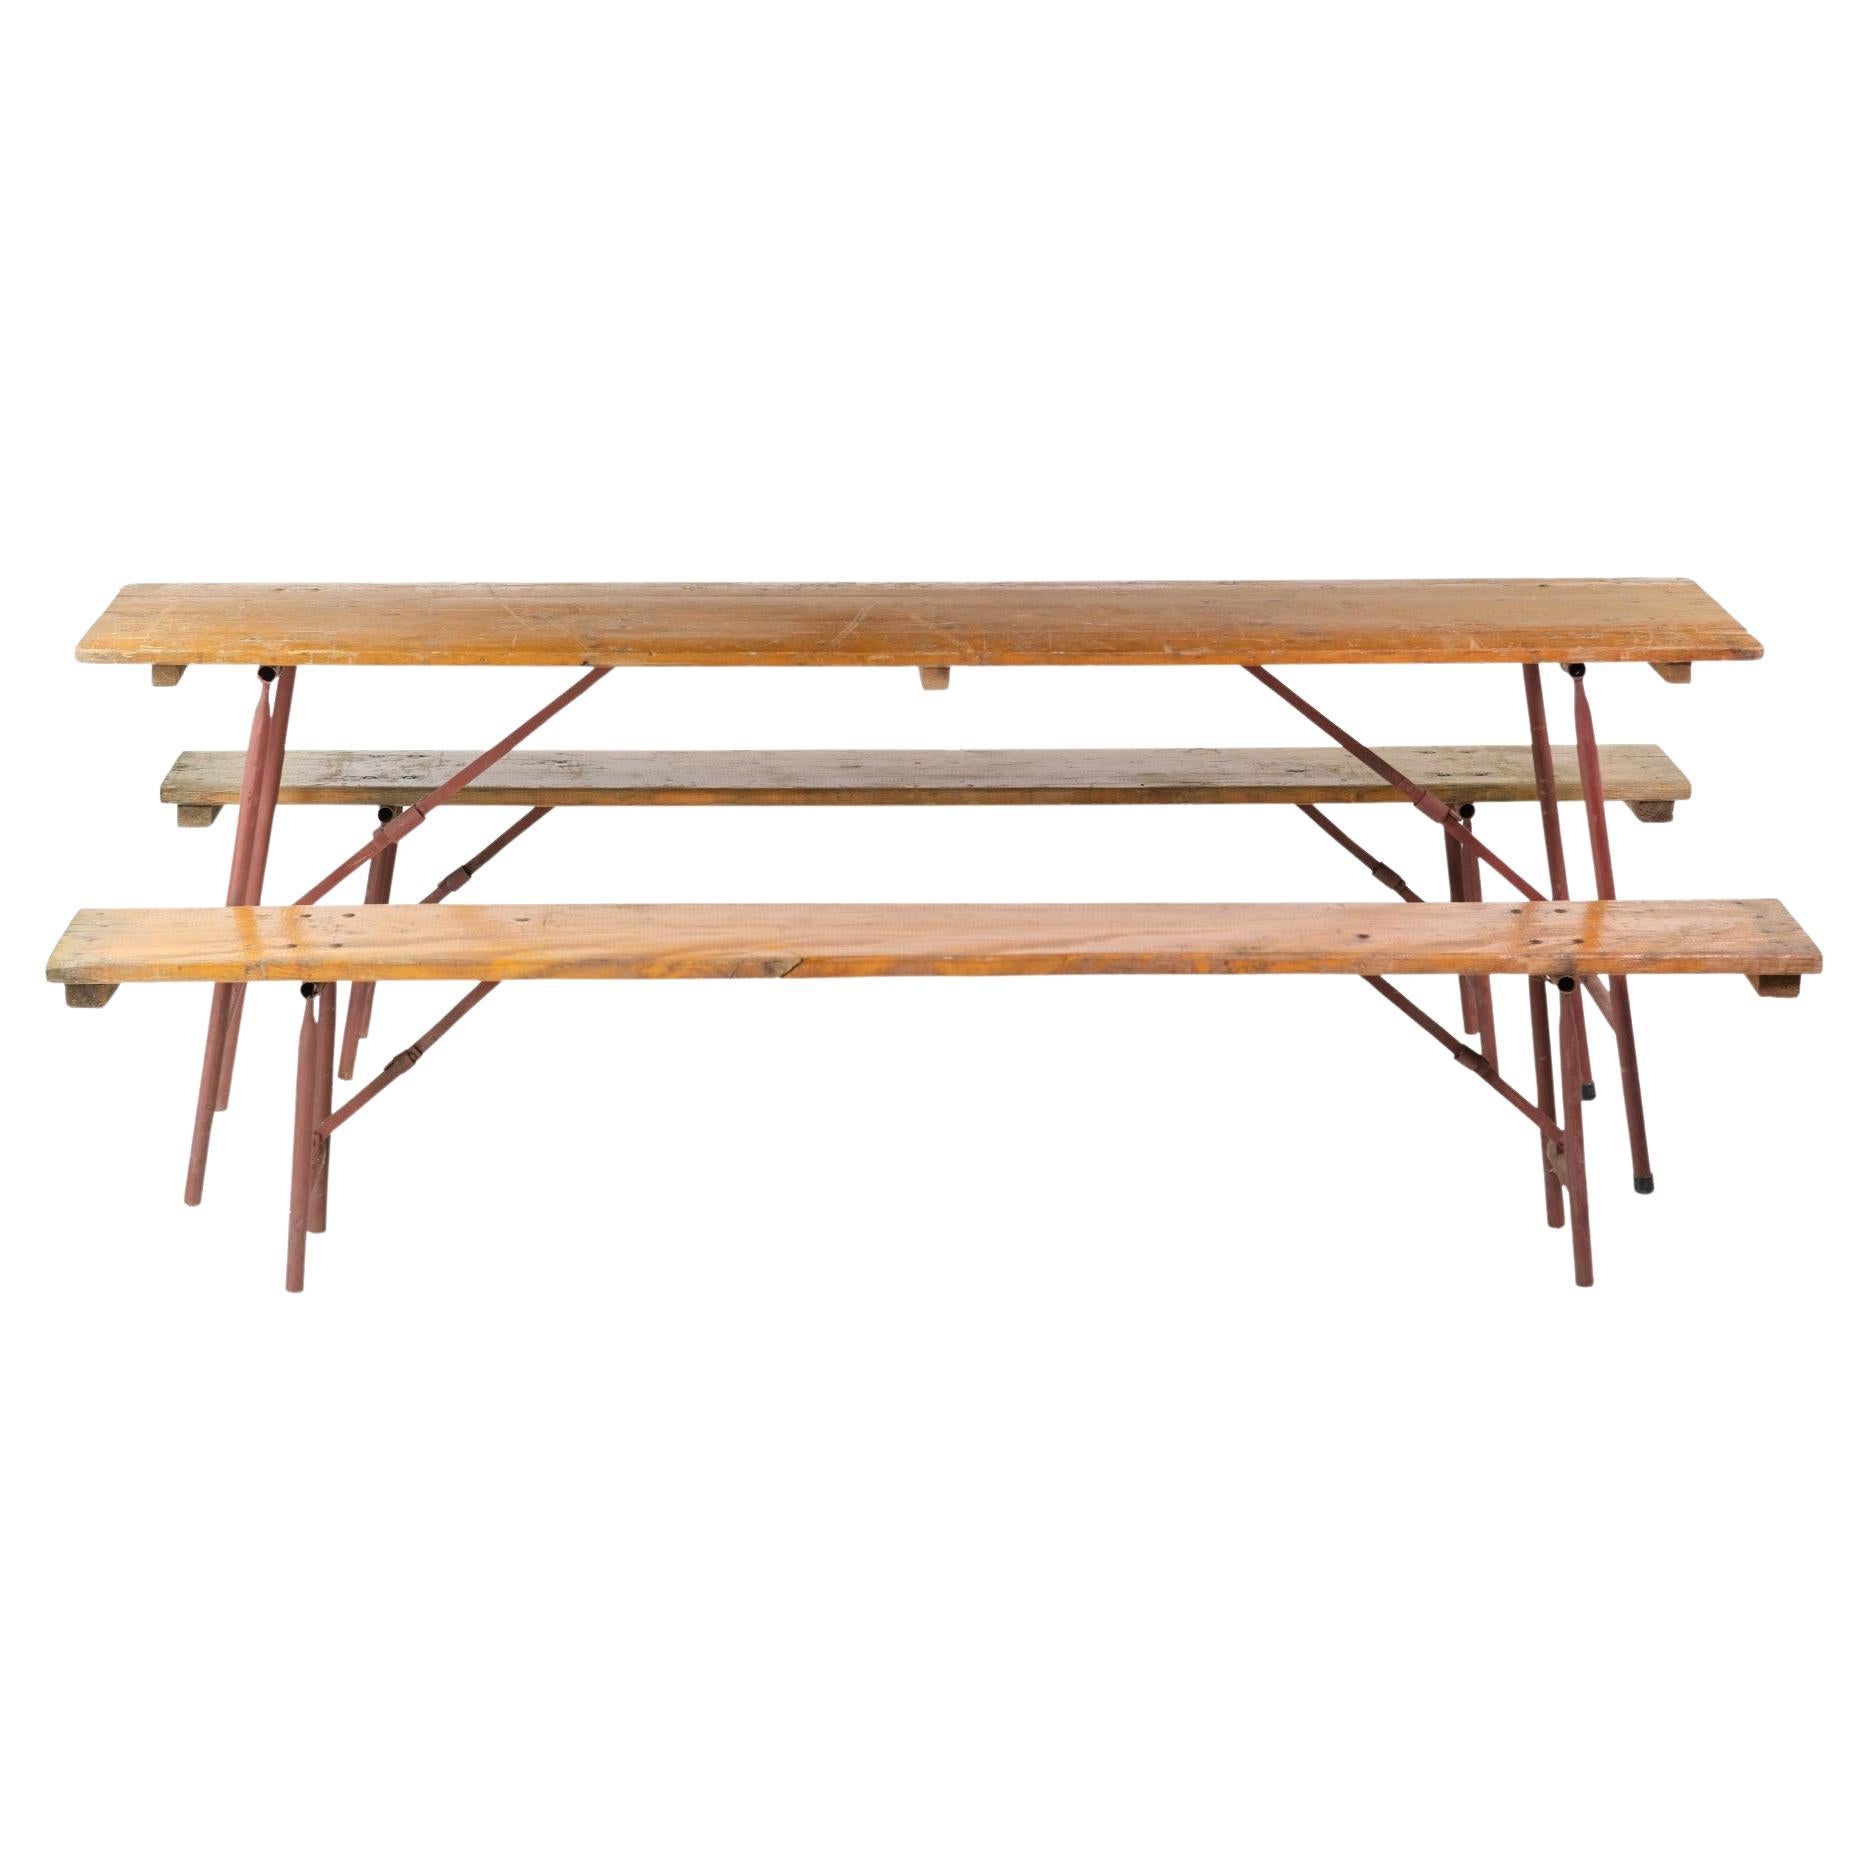 Folding Picnic Table - 13 For Sale on 1stDibs | vintage folding picnic table,  picnic table folding, vintage camping table